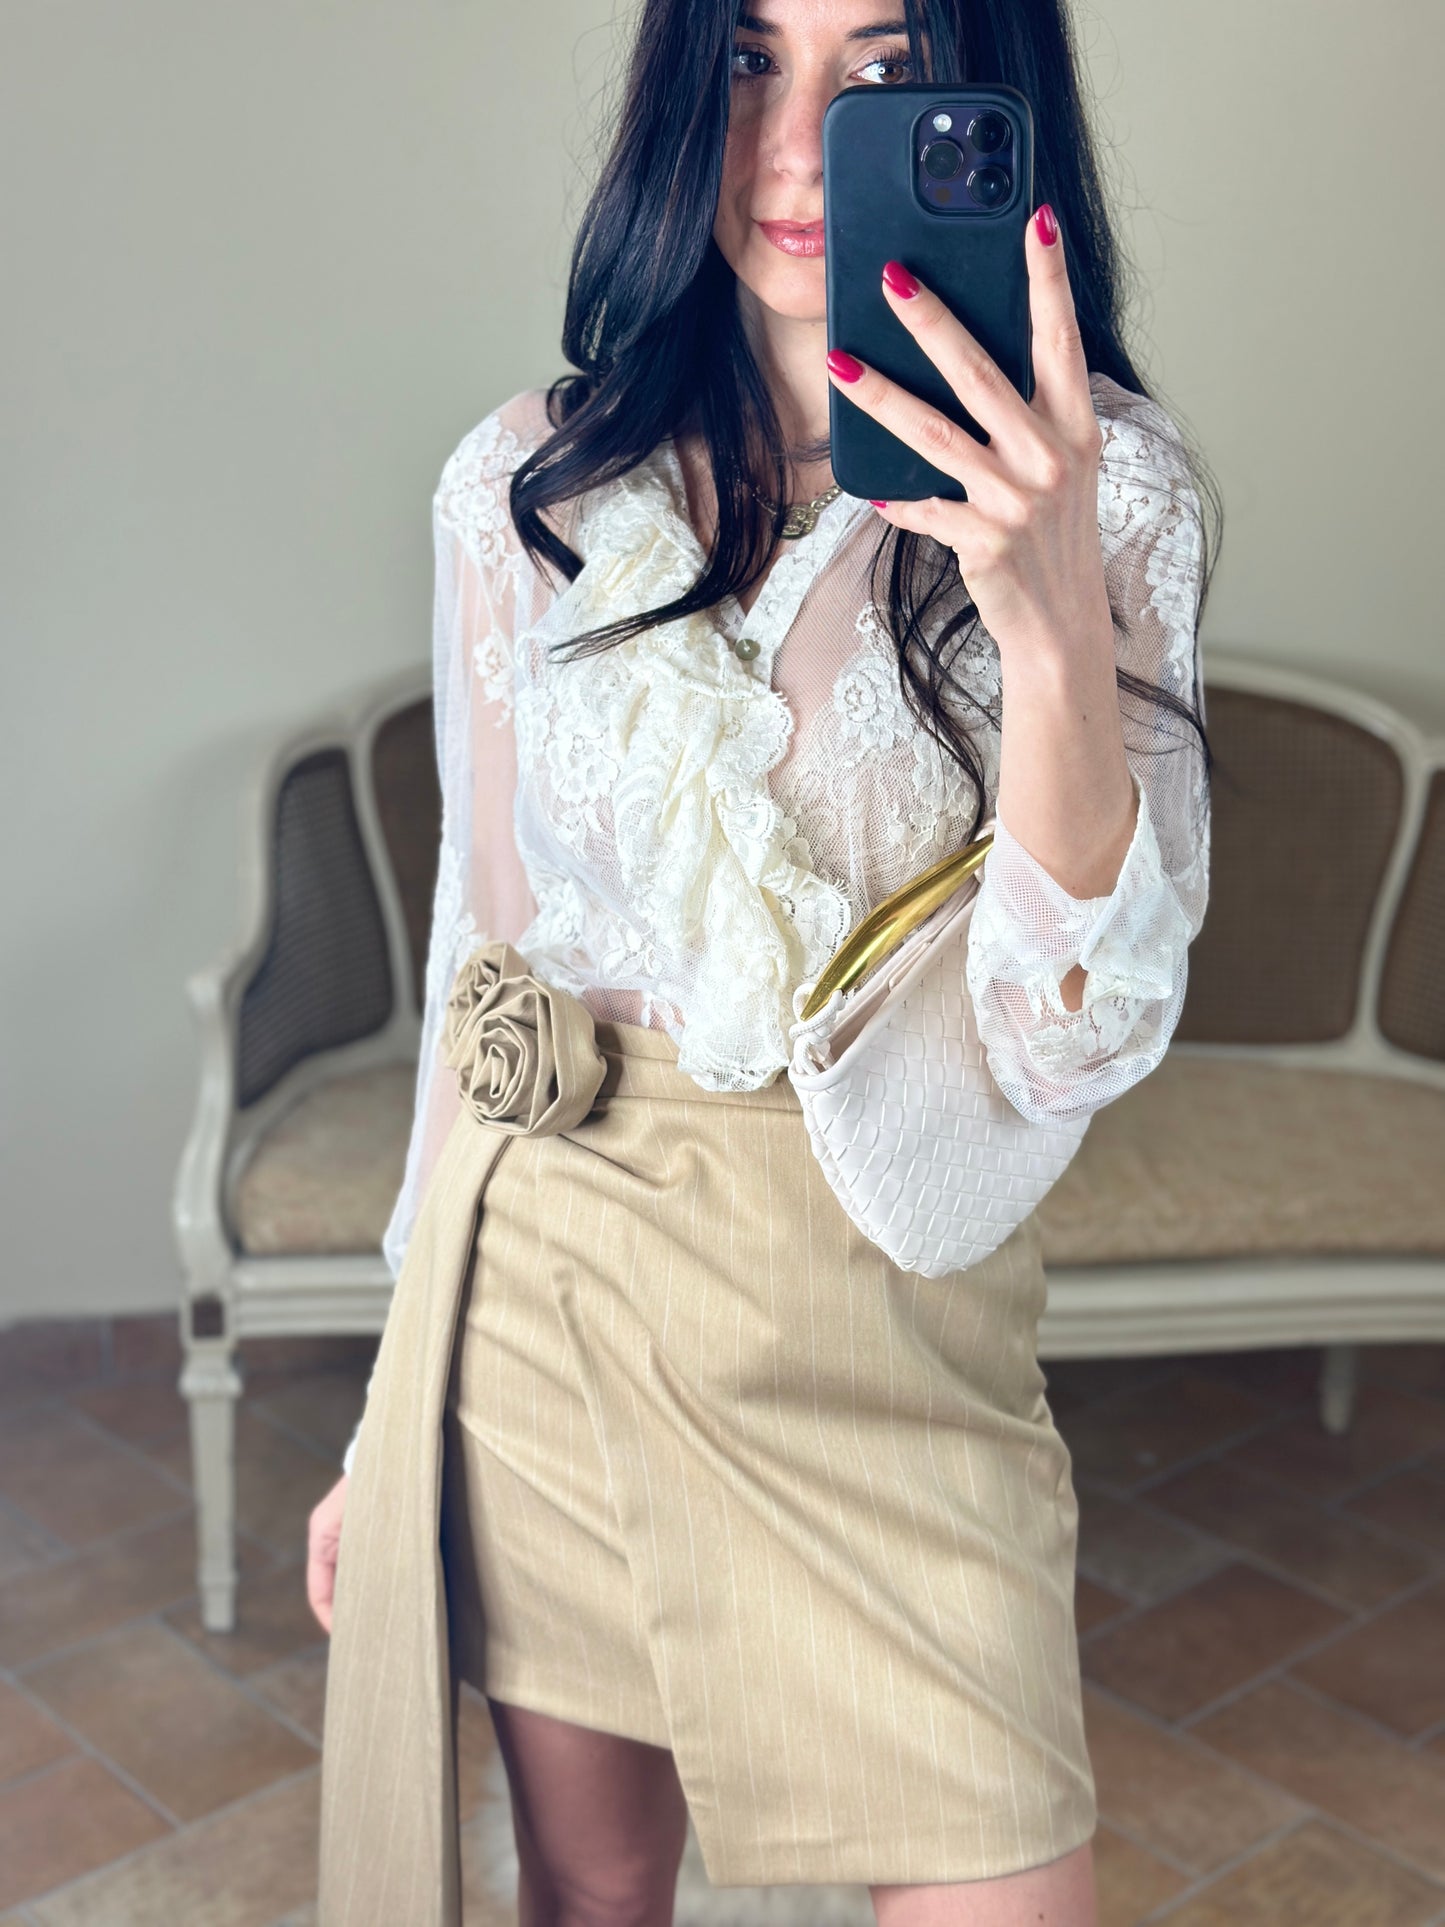 Silence Limited dinner out skirt